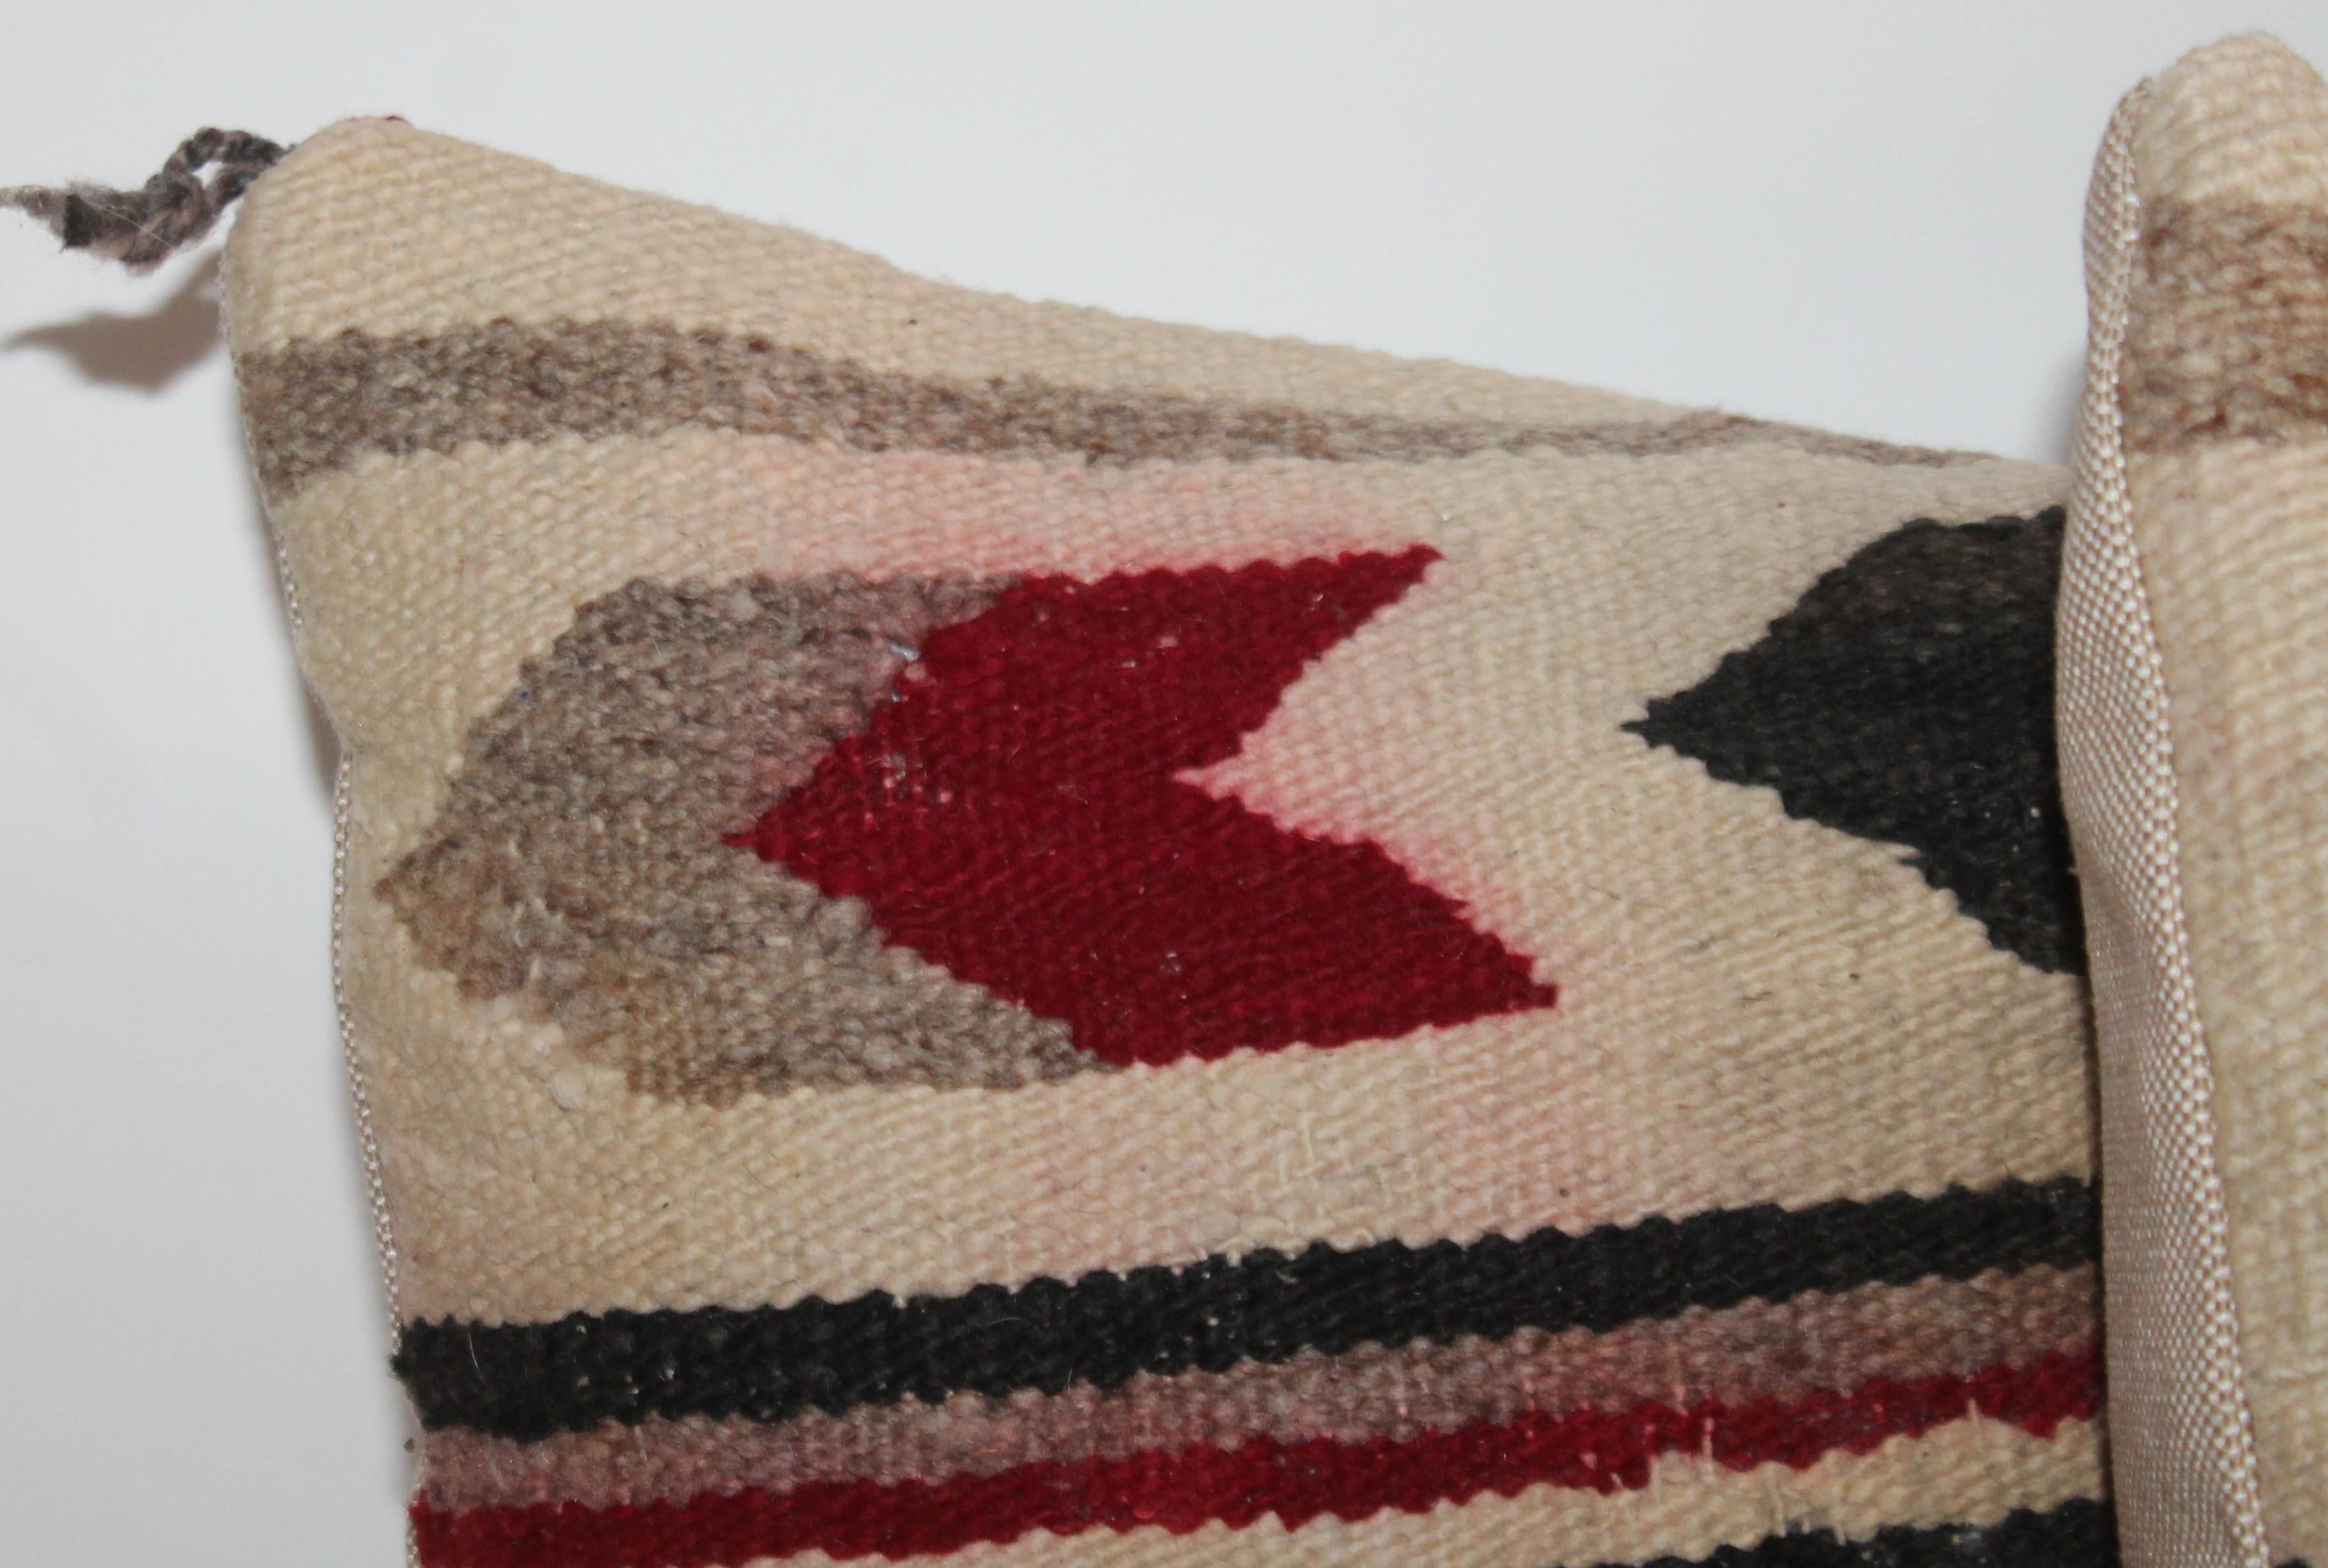 Navajo Indian geometric pair of pillows
Navajo geometric chevron, stripe, and water pattern. Weaving is in stunning condition with minor fade.